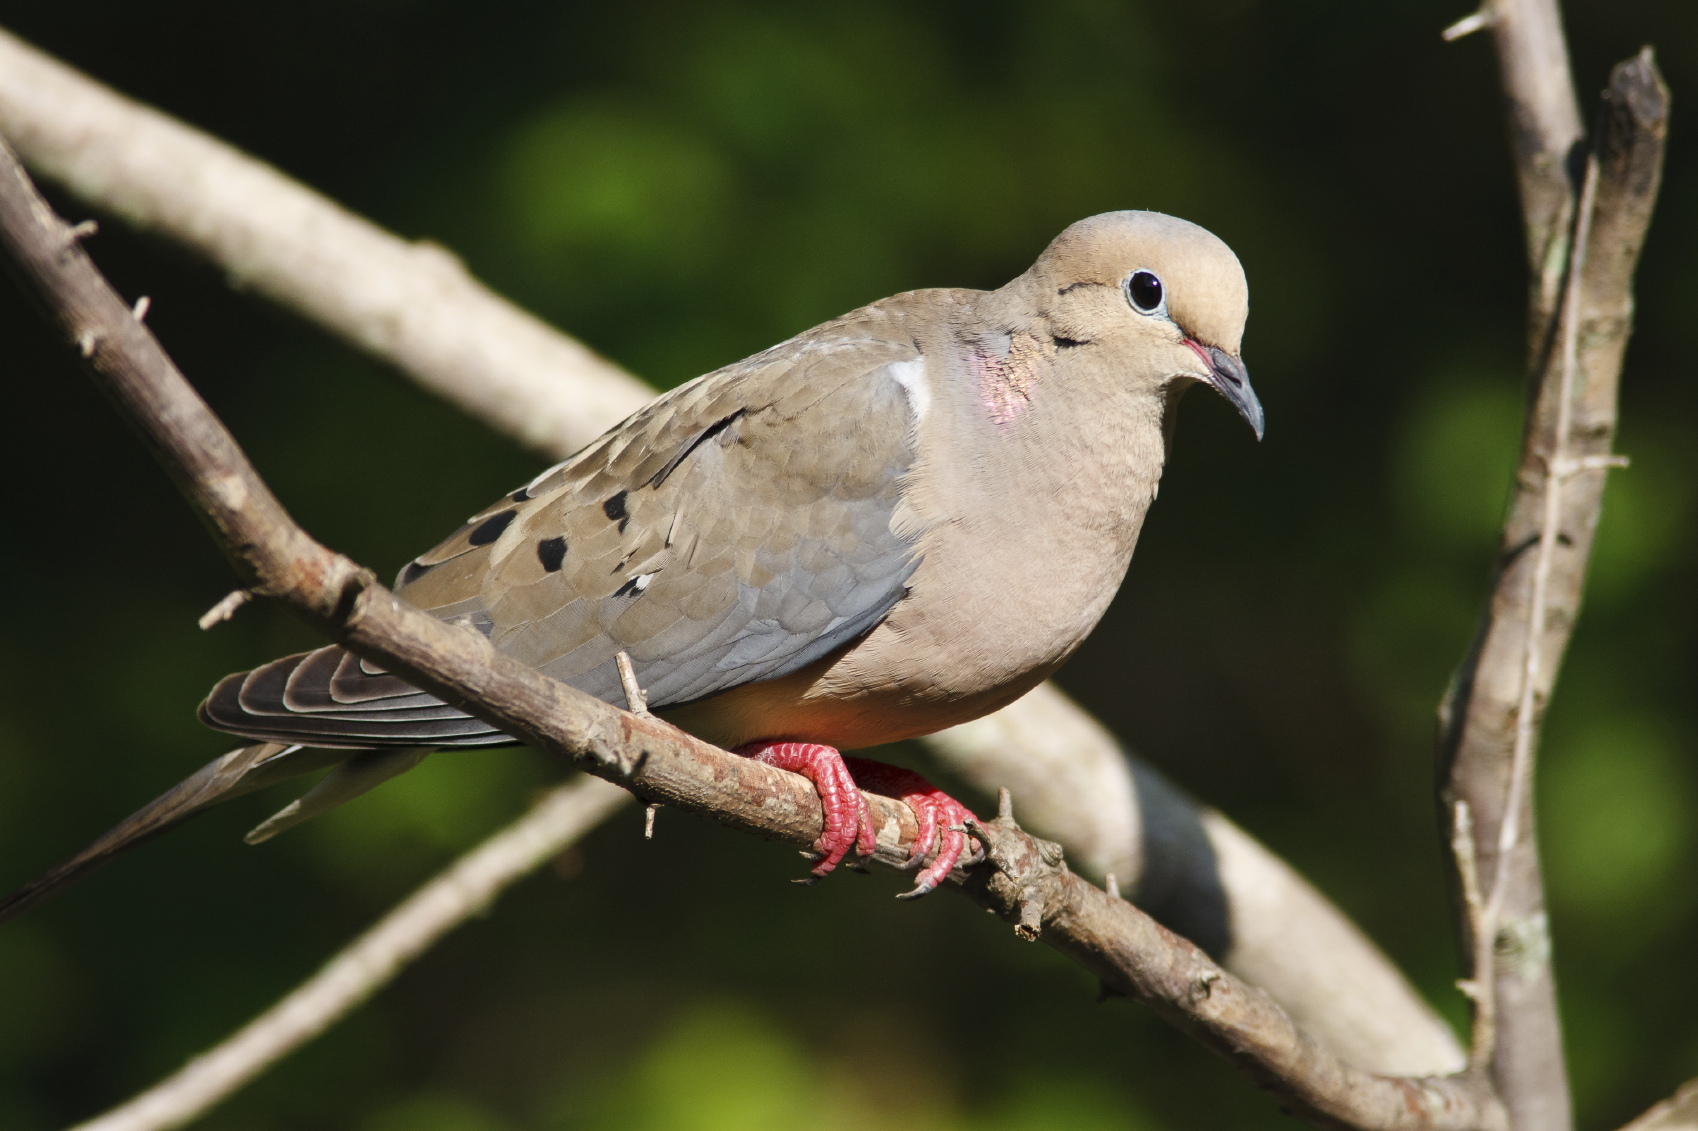 Figure 1. Mourning doves are one of the most widely distributed bird species in North America.